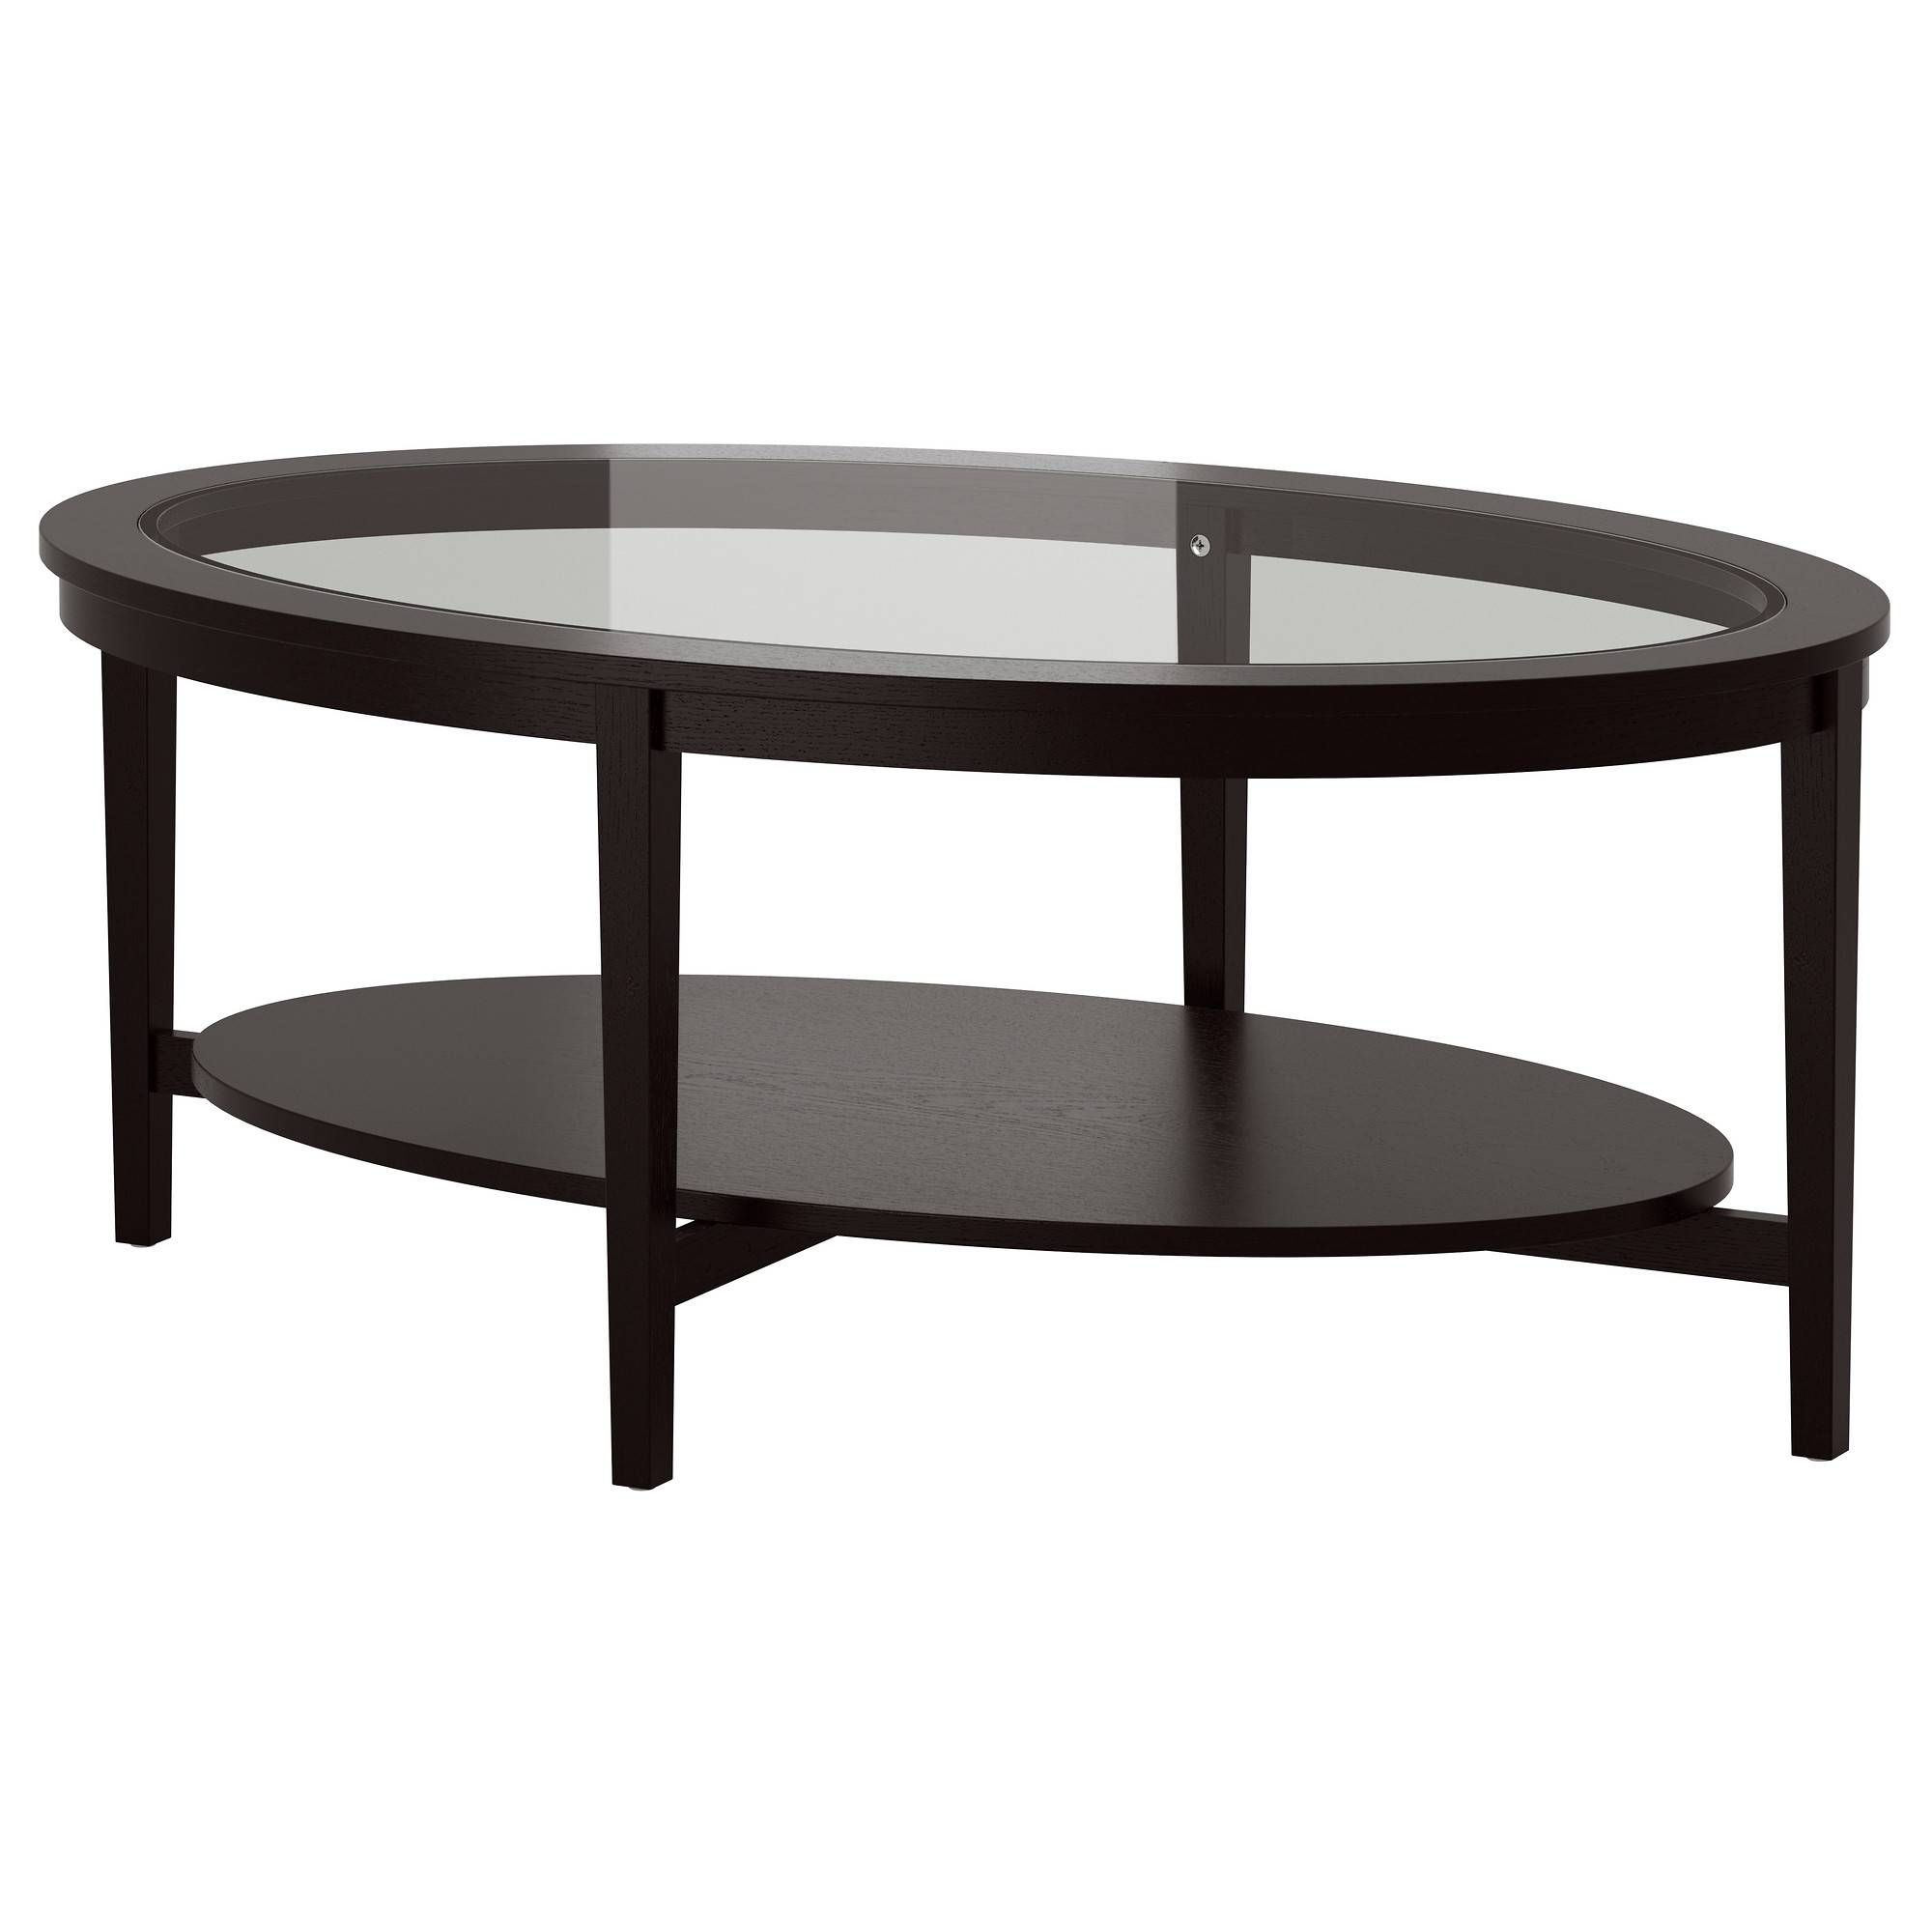 Coffee Tables: Amusing Coffee Tables Ikea Design Ideas Black Within Small Coffee Tables With Shelf (View 15 of 30)